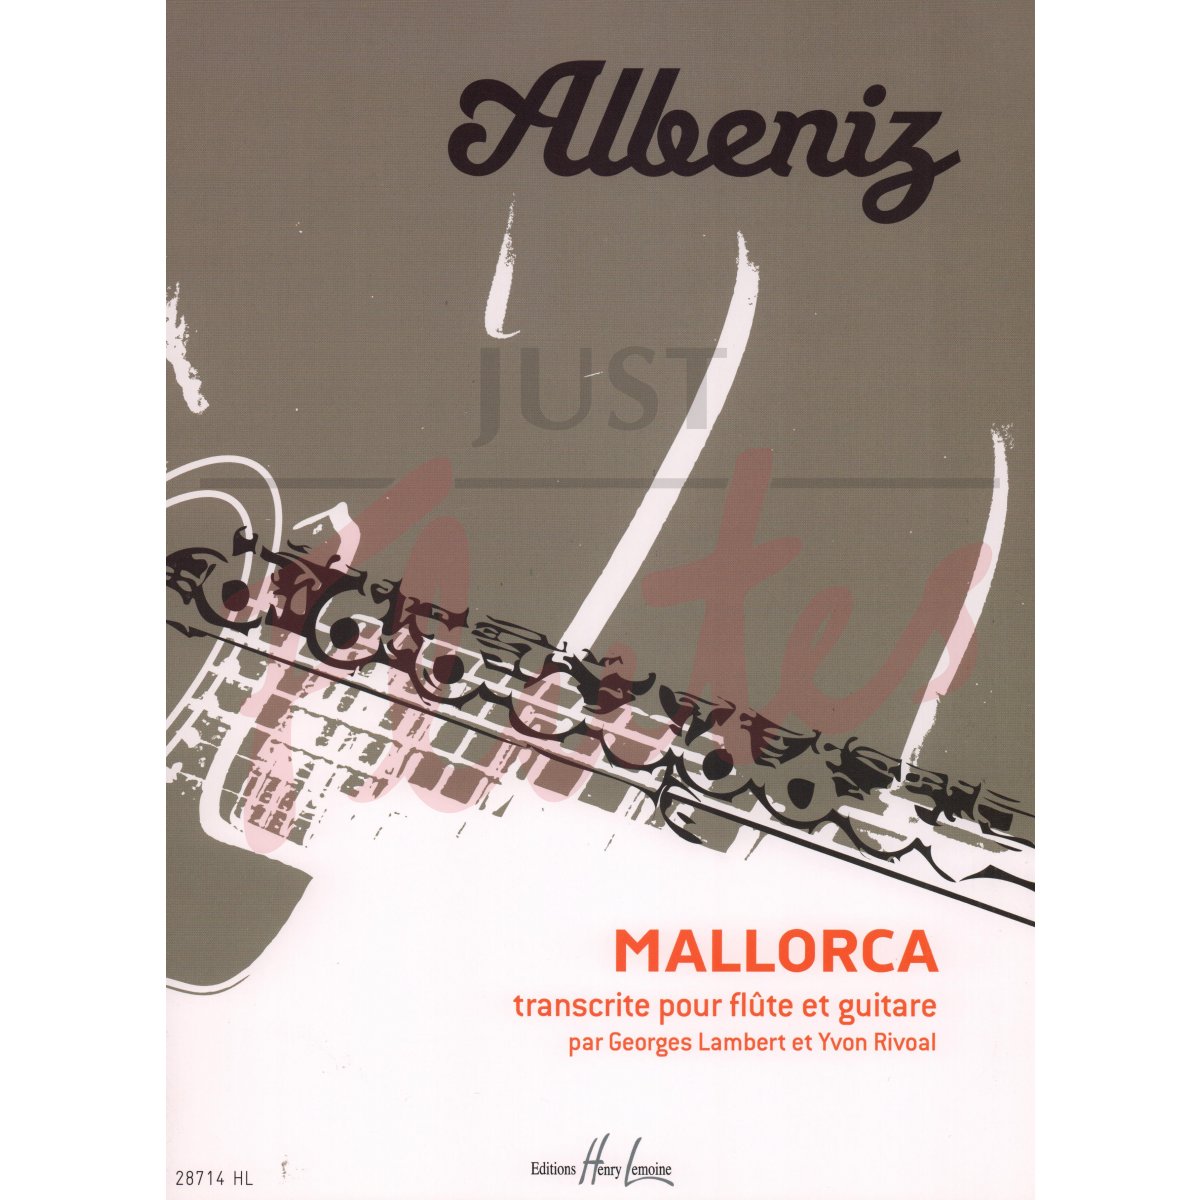 Mallorca transcribed for Flute and Guitar